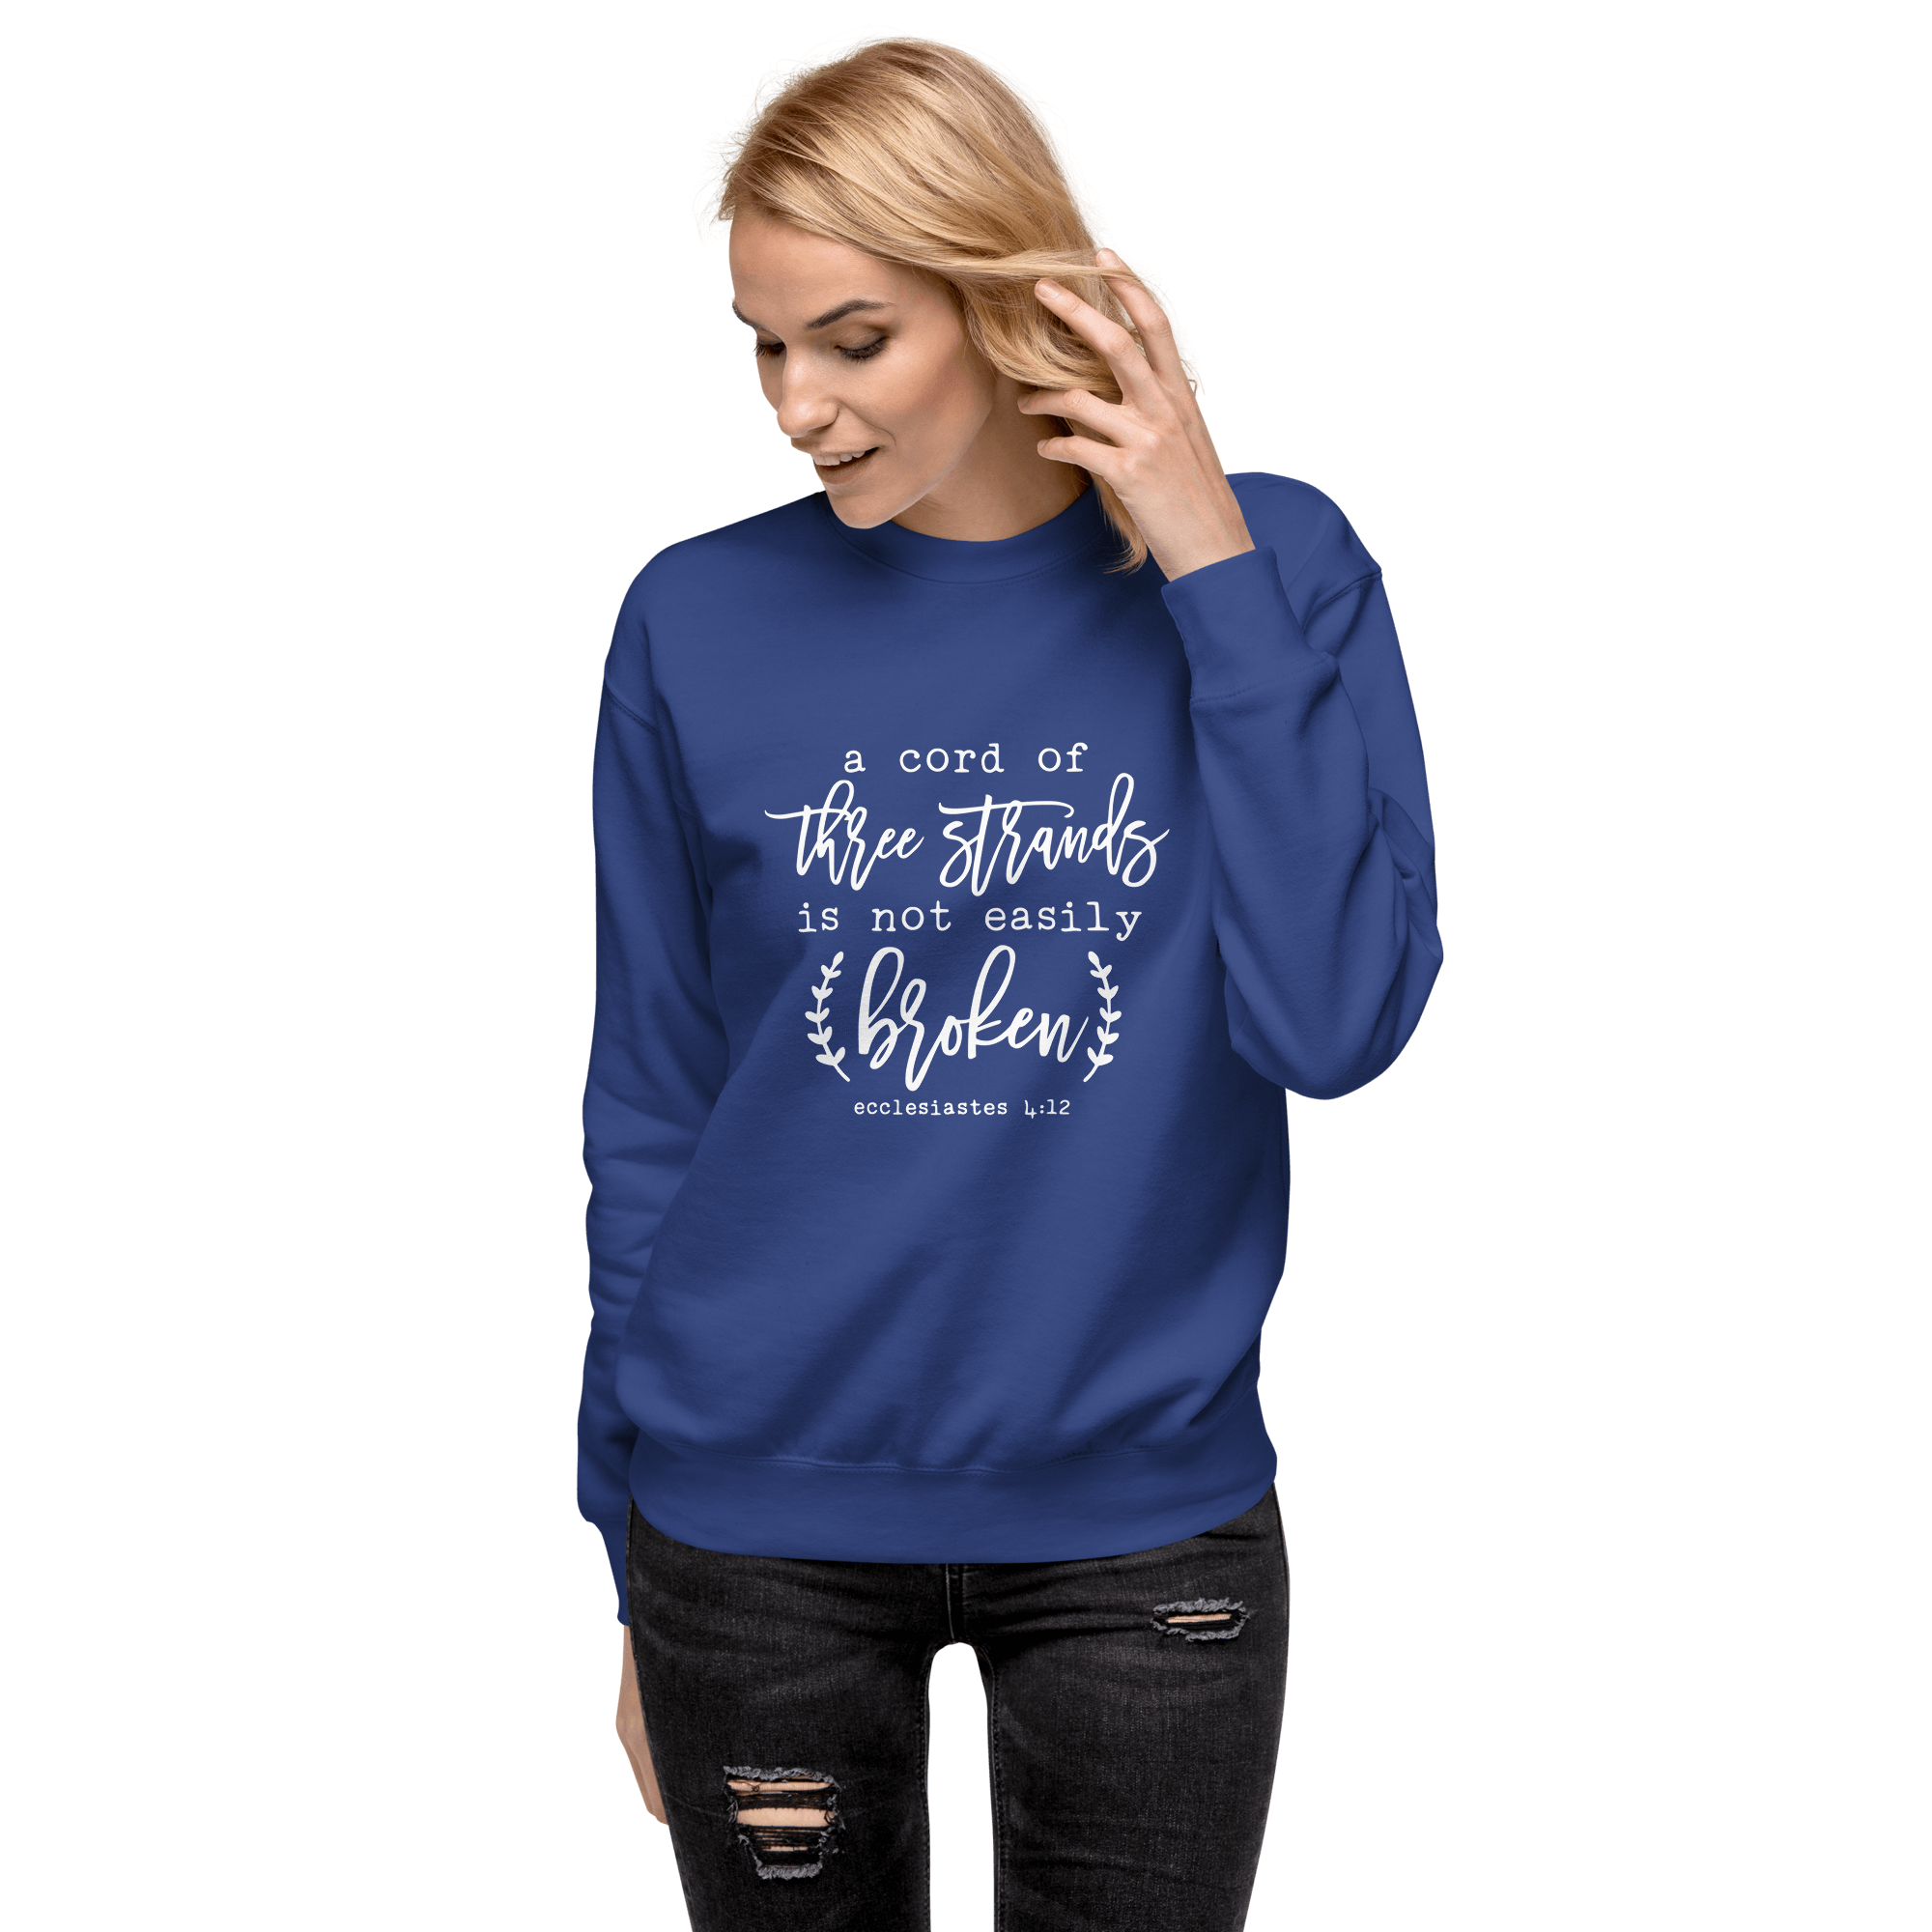 A cord of 3 strands is not easily broken - Ecclesiastes 4:12 Sweatshirt - Christian Clothing Company